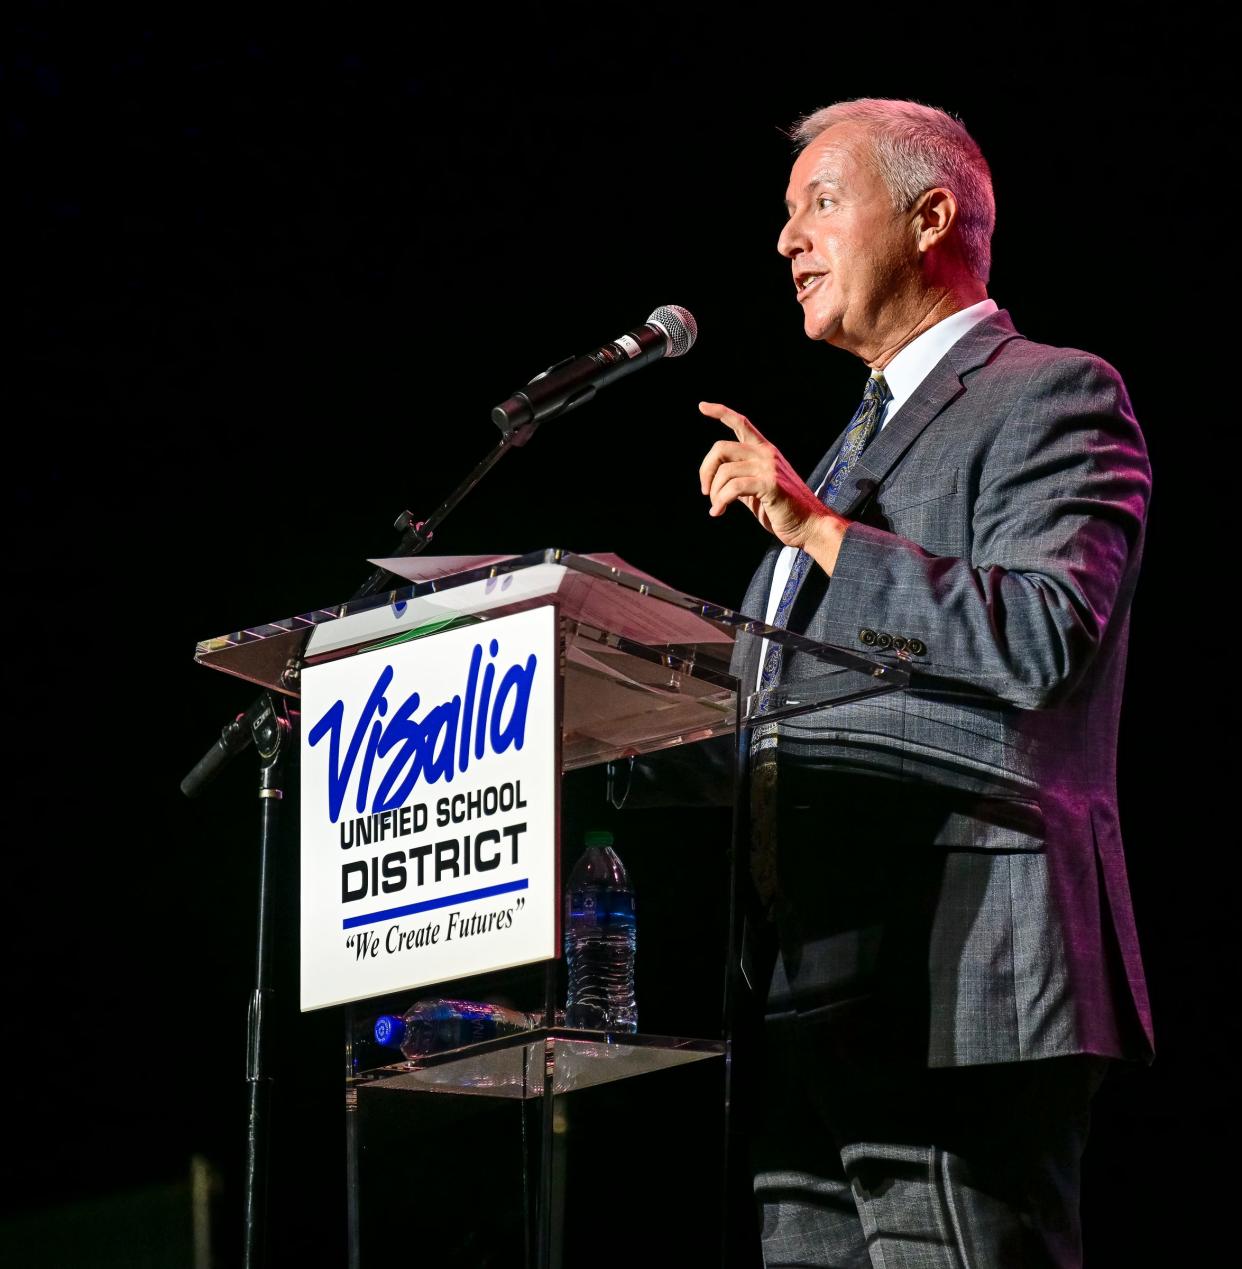 Superintendent Kirk Shrum speaks Monday, August 8, 2022 during Visalia Unified School District's convocation at the Visalia Convention Center.